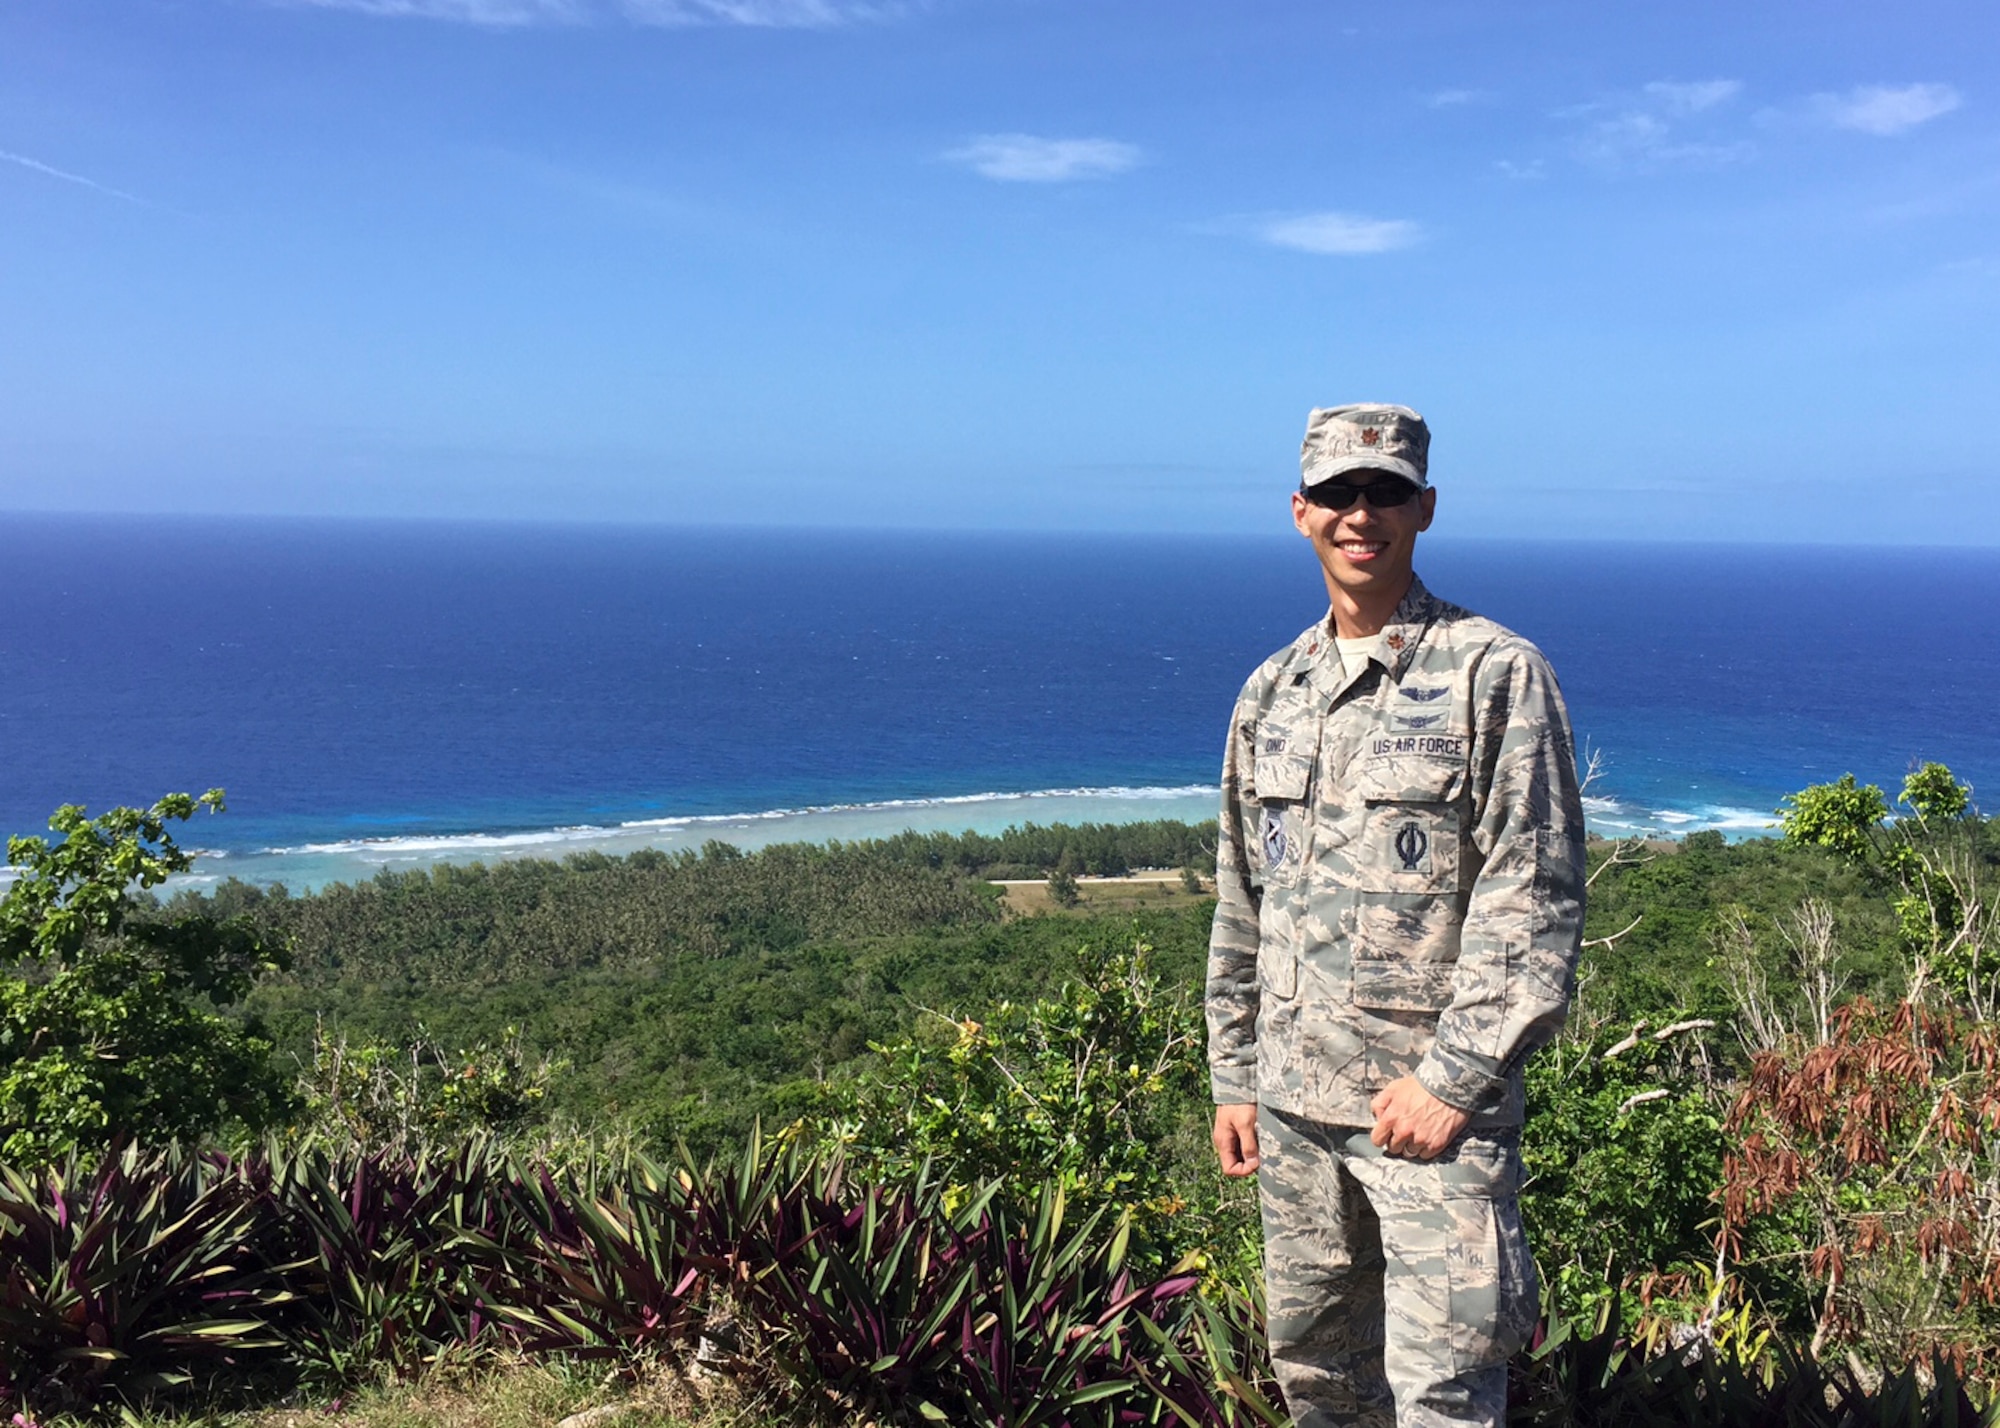 Maj. Tomoyuki Ono, U.S. Test Pilot School, Flying Qualities chief, poses for a picture on the coast of Guam in the Pacific Ocean. Ono had the chance to participate in a Silver Flag exercise at Andersen Air Force Base last month, thanks to the Air Force's Language Enabled Airmen Program. (Courtesy photo)